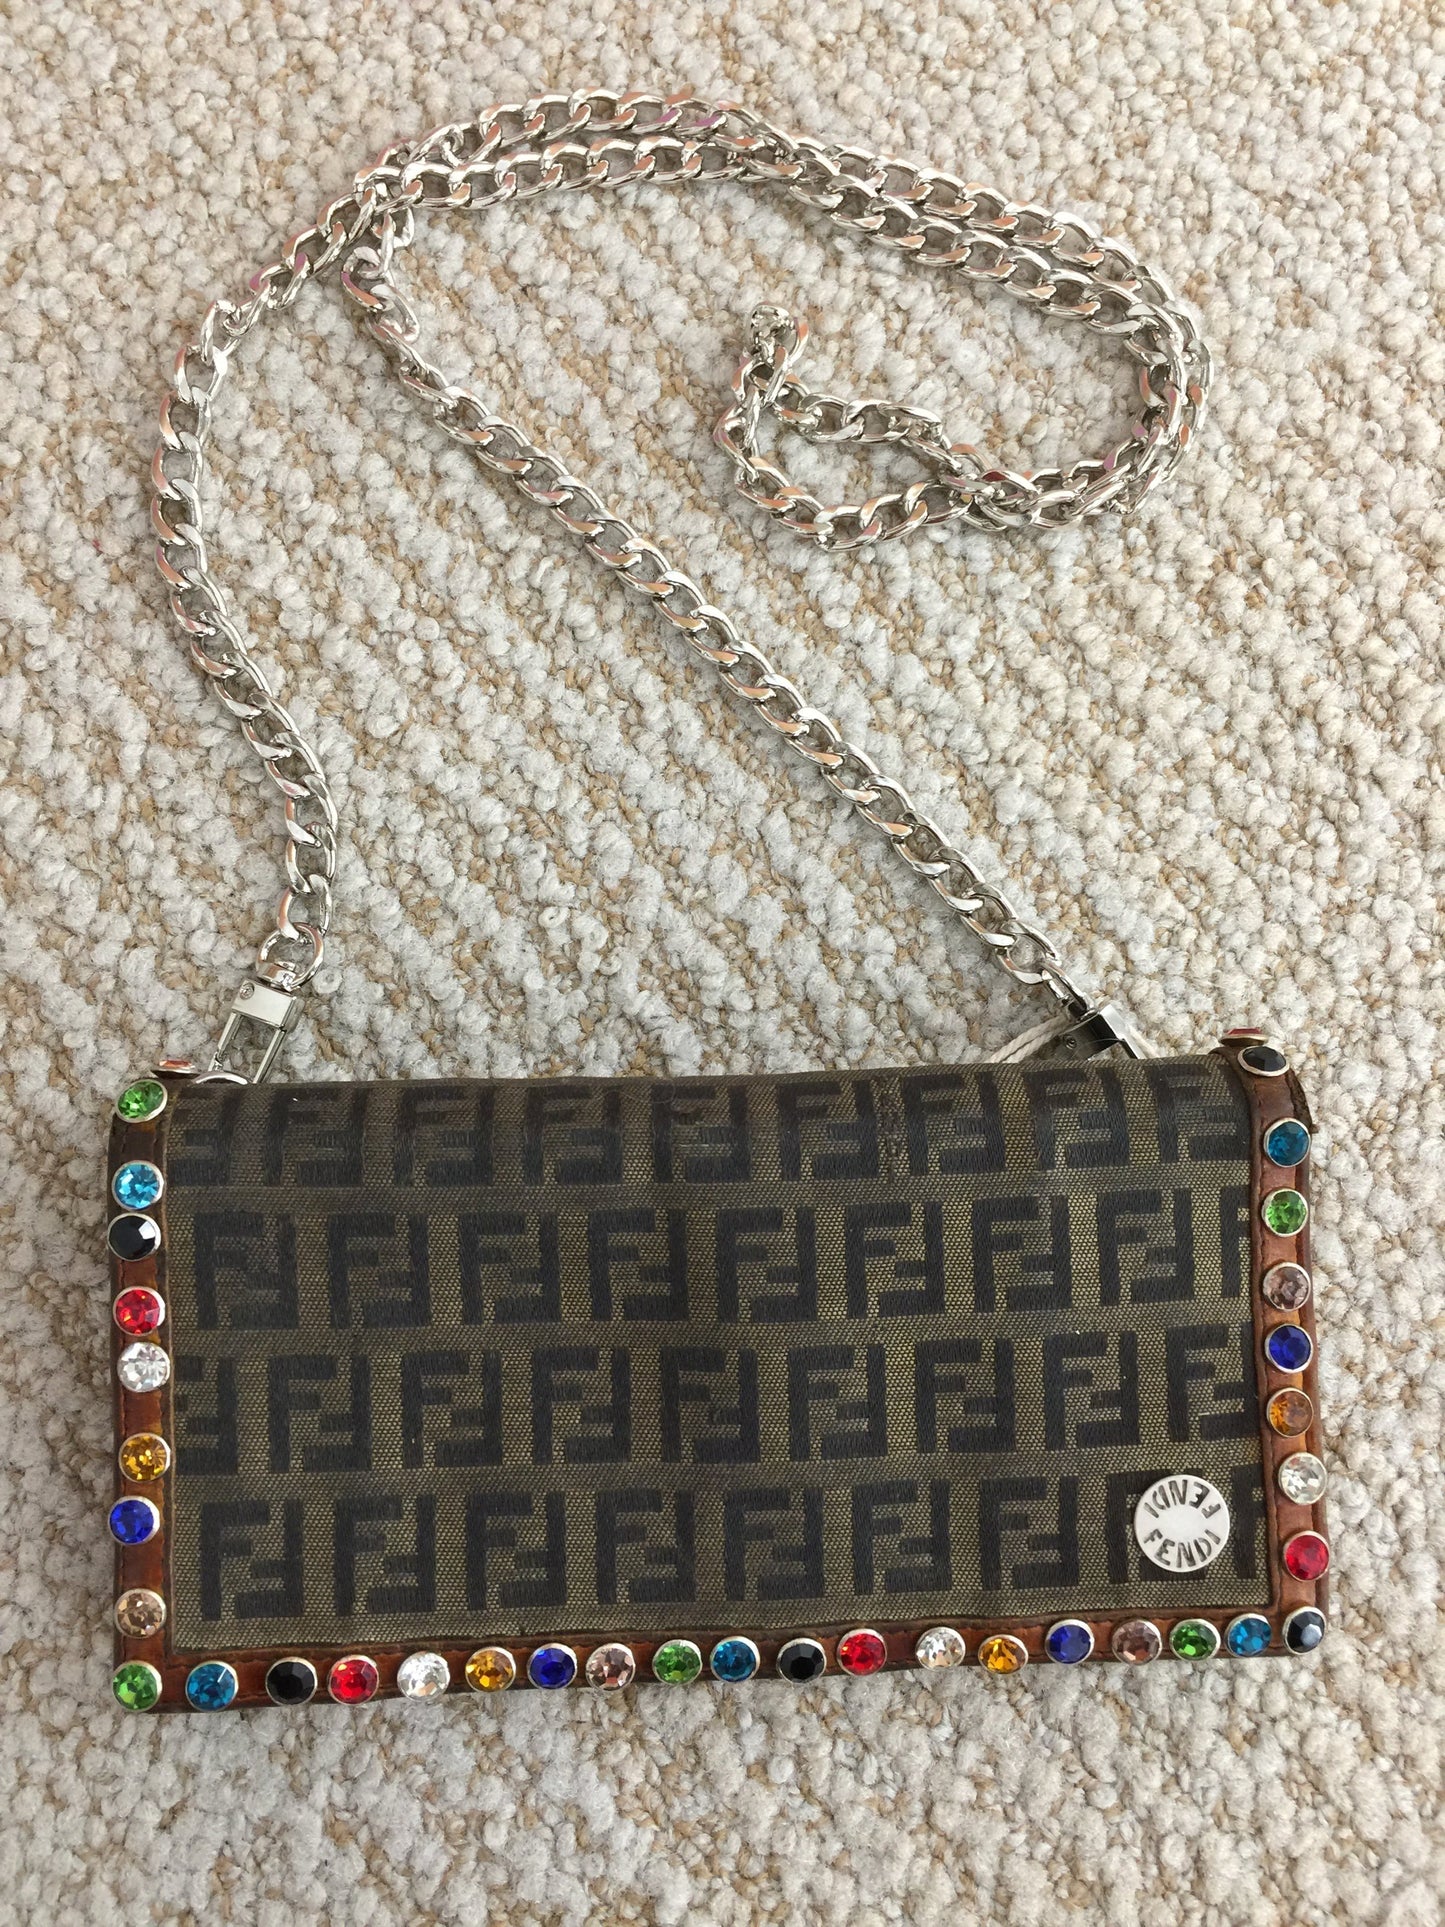 LS Upcycled Bejeweled FF Clutch